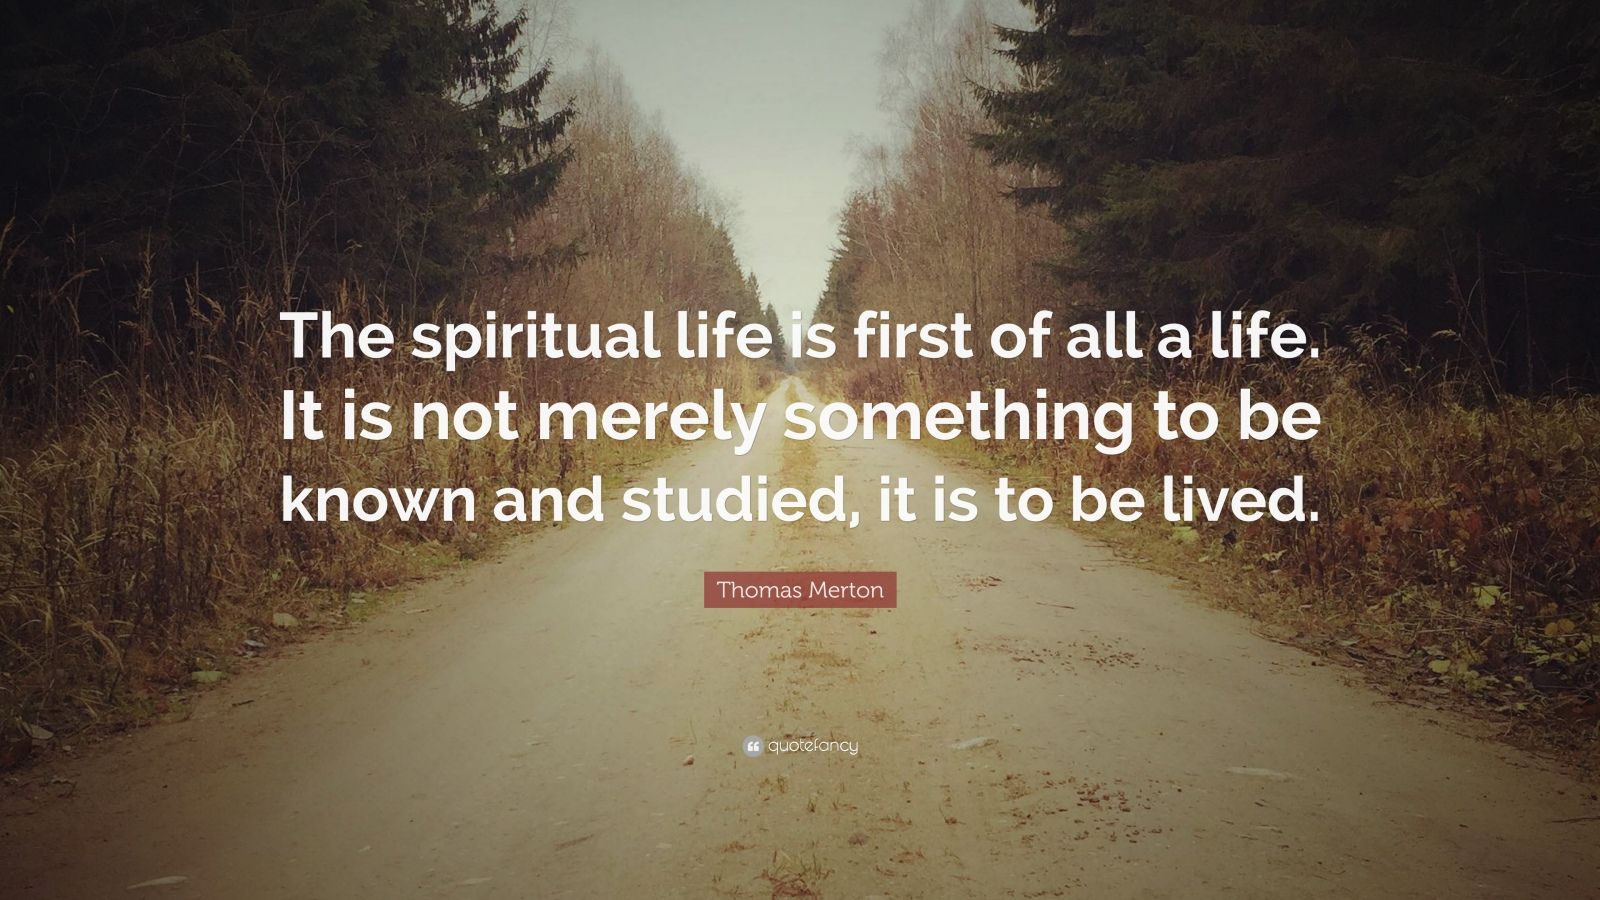 Thomas Merton Quote “The spiritual life is first of all a life It